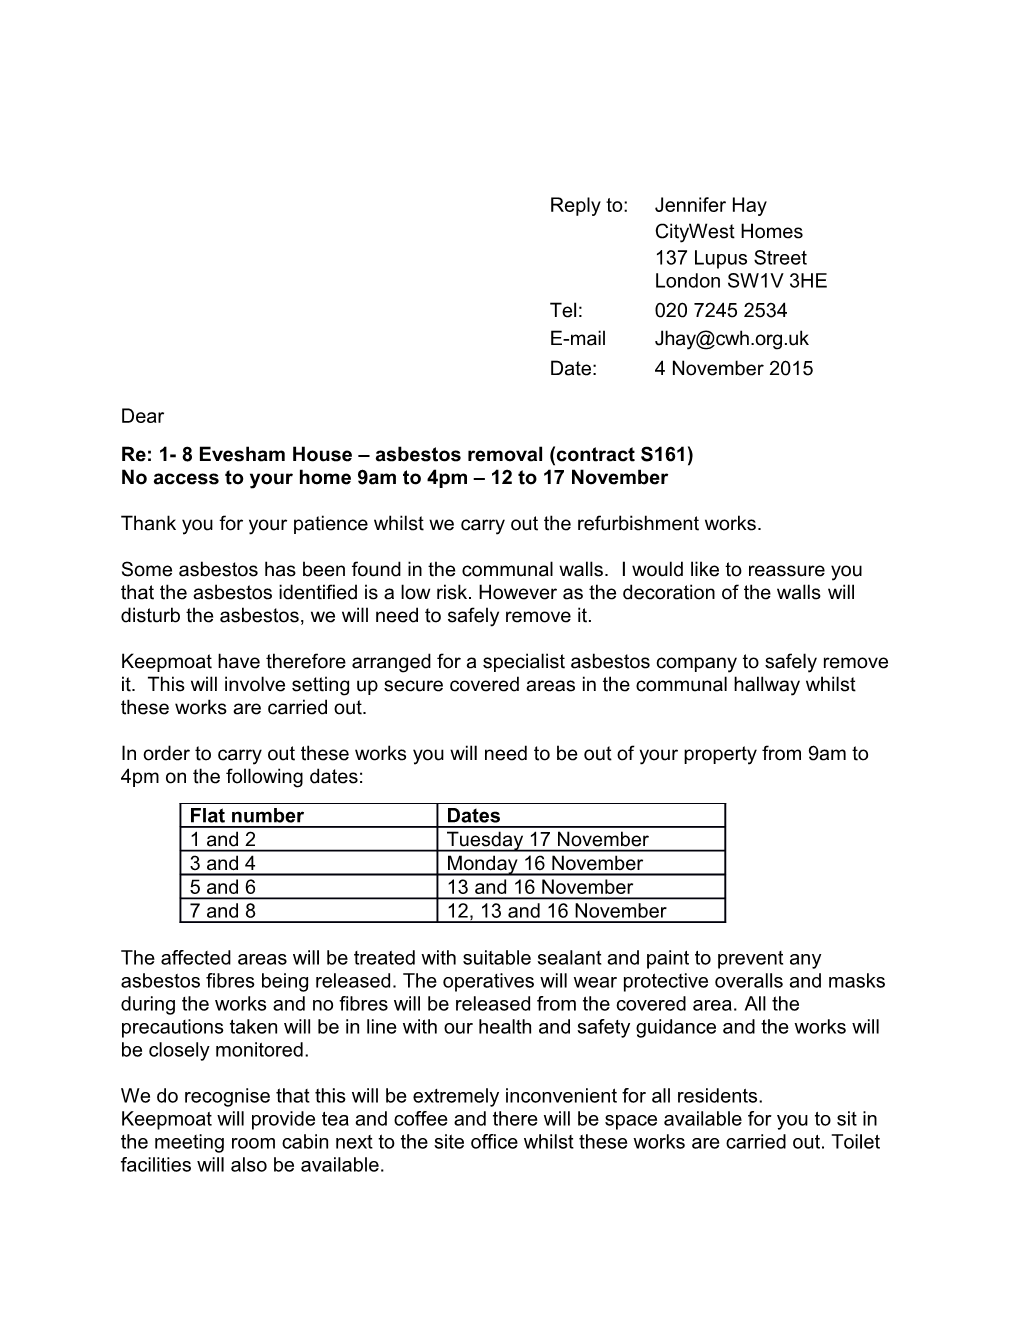 Re: 1- 8 Evesham House Asbestos Removal (Contract S161)